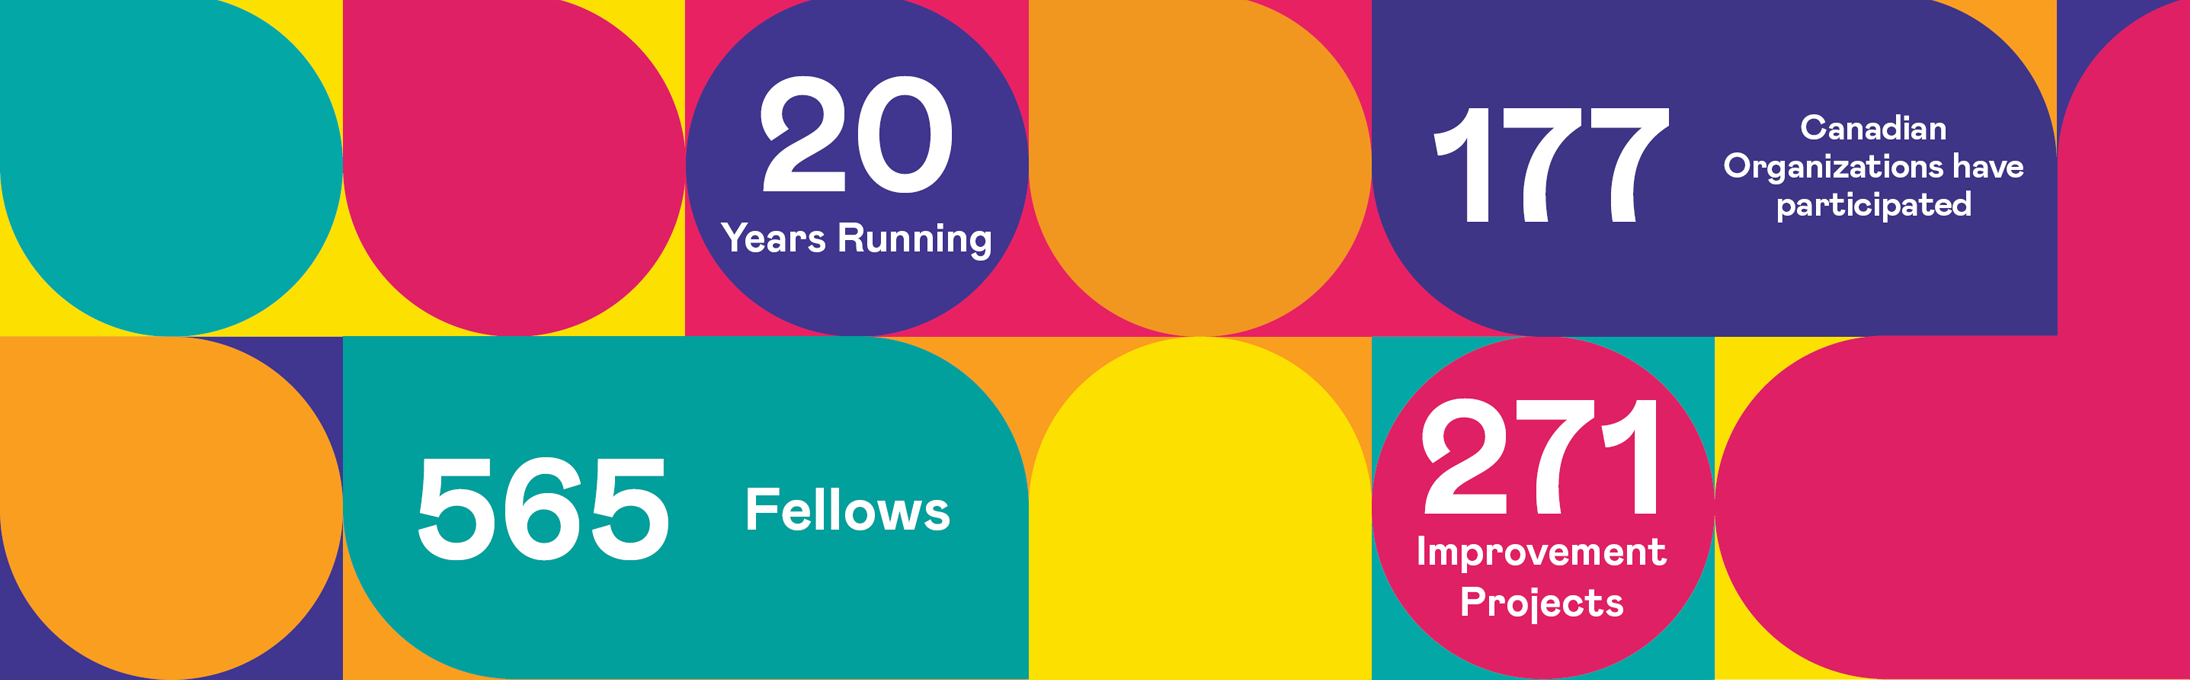 EXTRA by the numbers (16 years running, 160 Canadian organizations have participated; 500 fellows, 254 improvement projects)